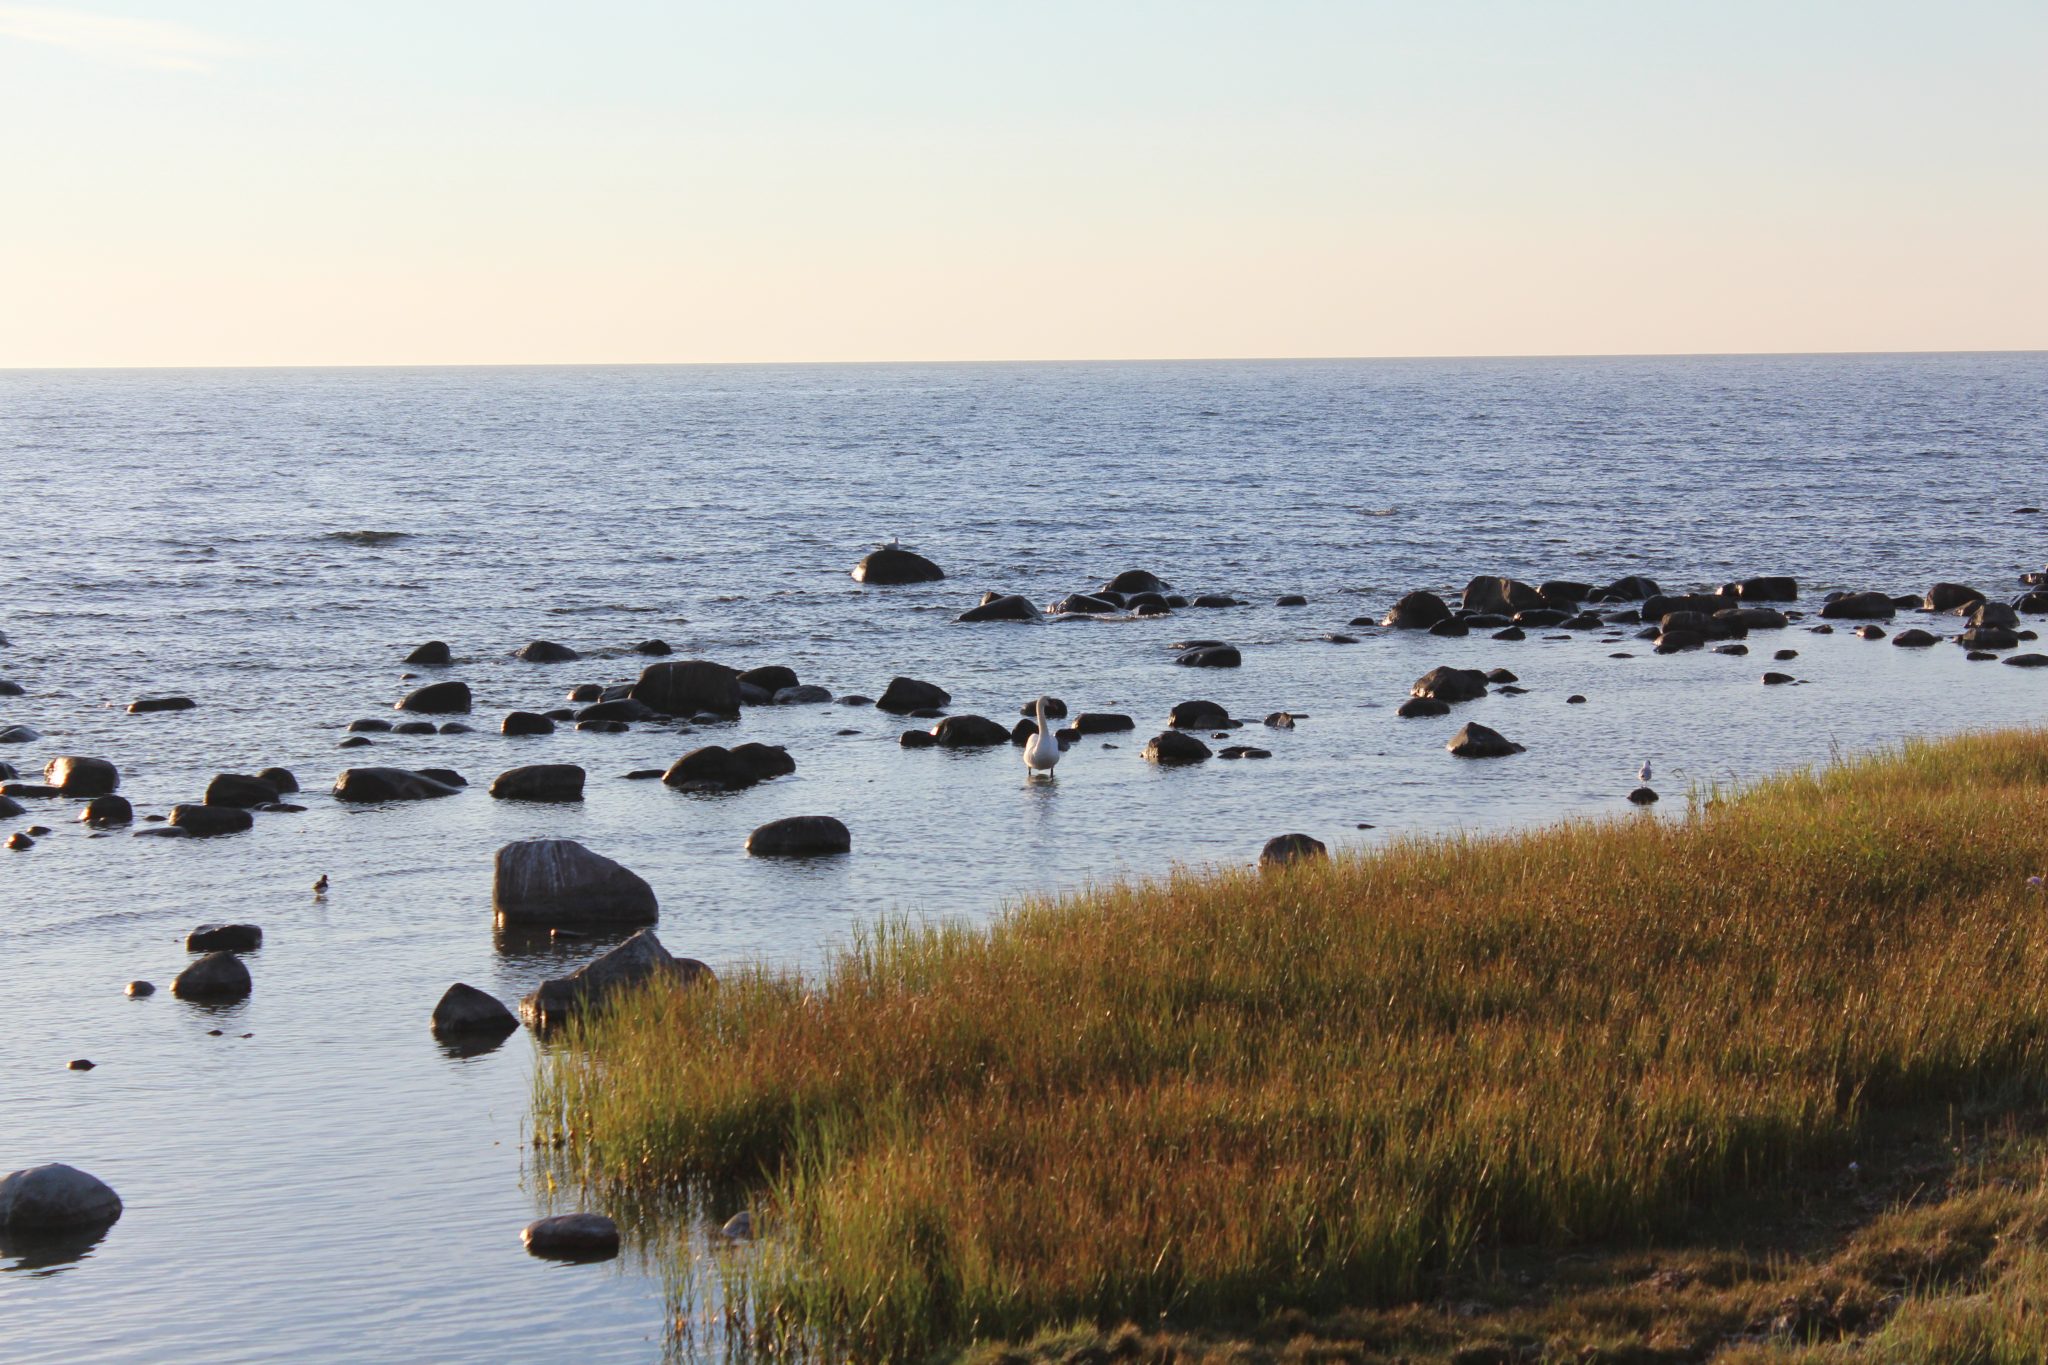 This is Snäck, north of Visby. We stopped and enjoy an evening picknick here the first evening on the island.